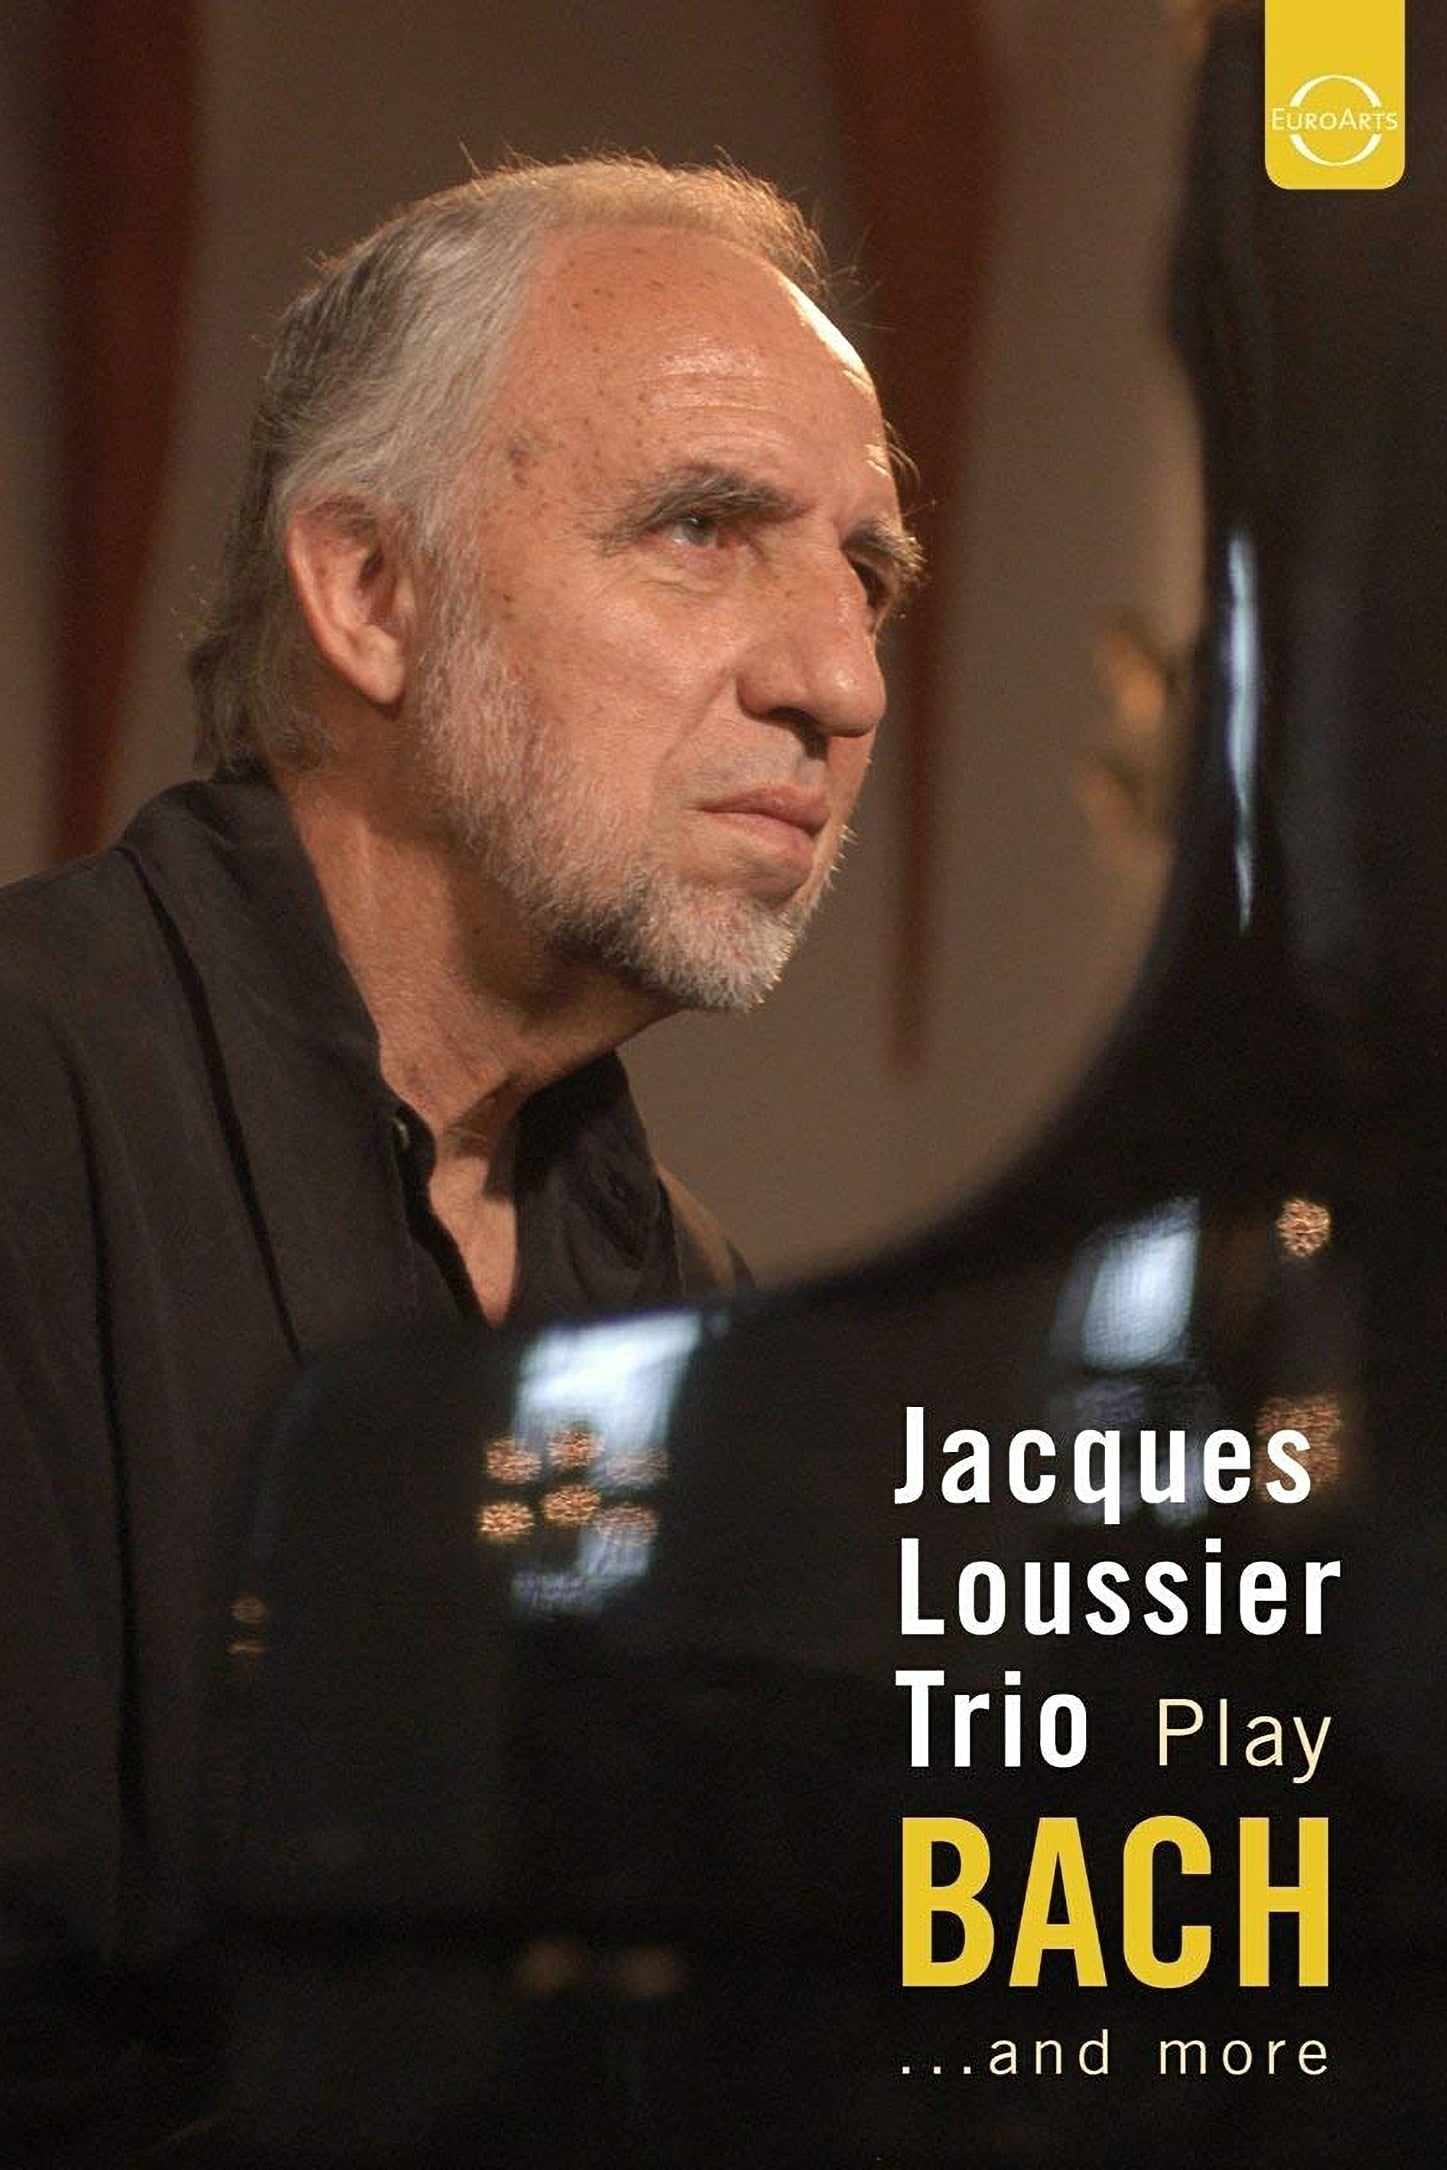 Jacques Loussier Trio - Play Bach and More